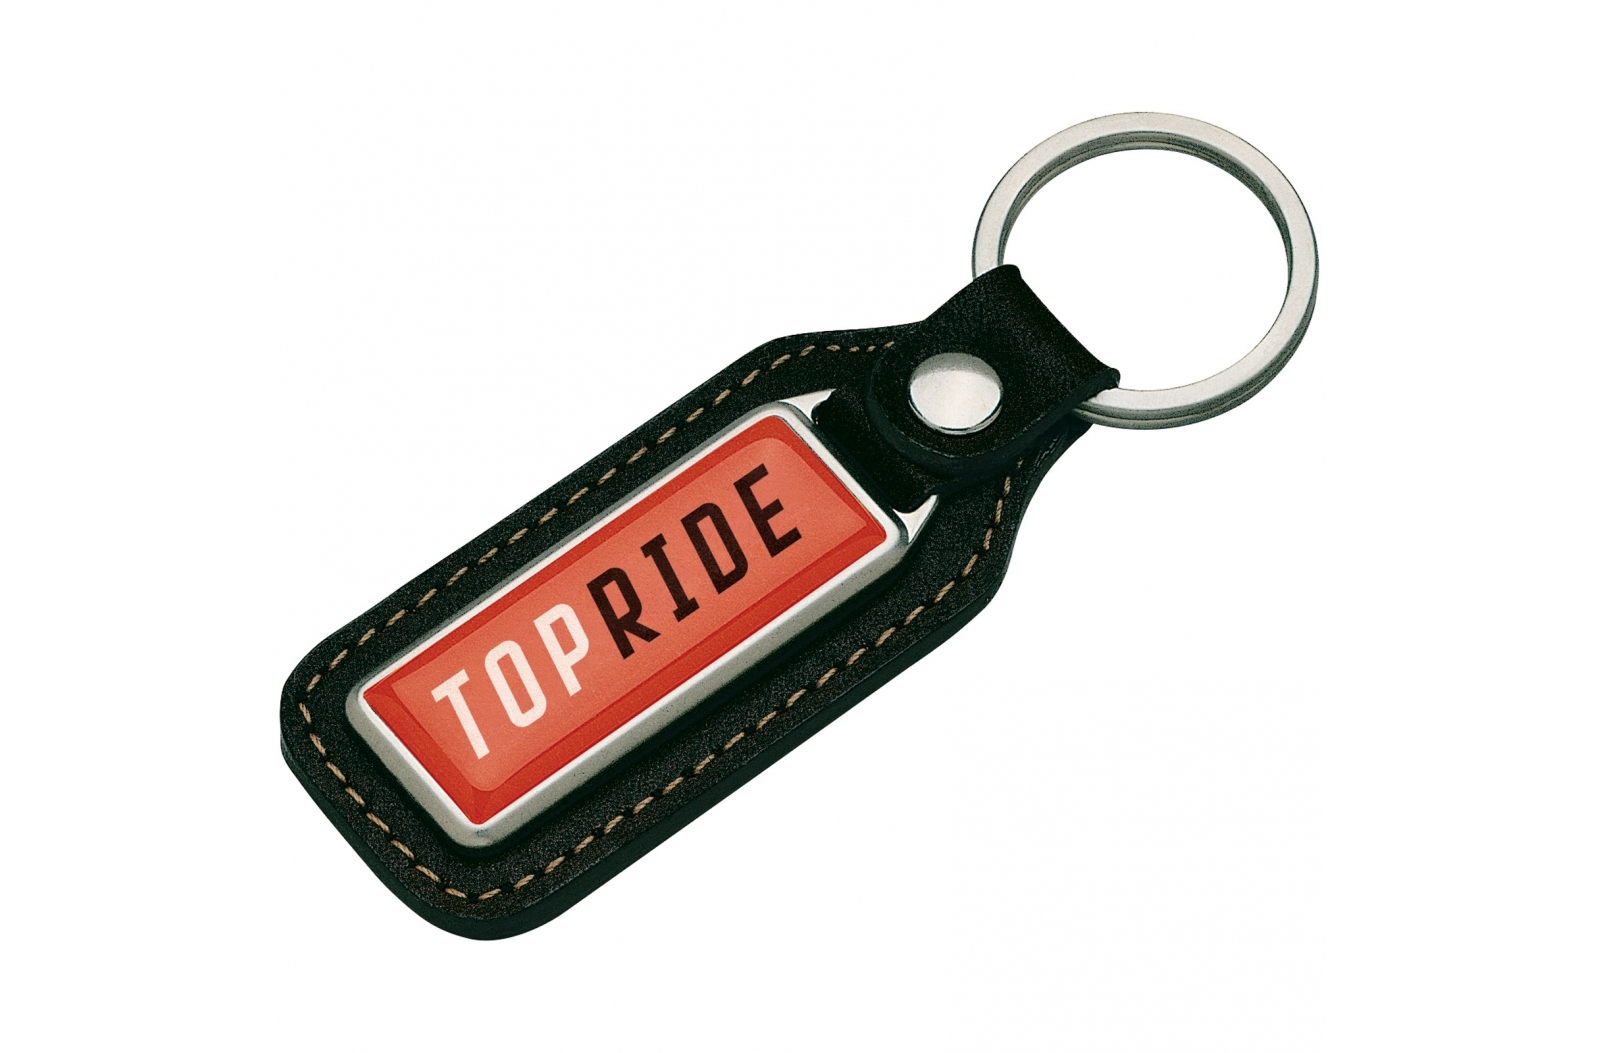 A keyring made of metal and leather with a single-sided doming - Chilworth